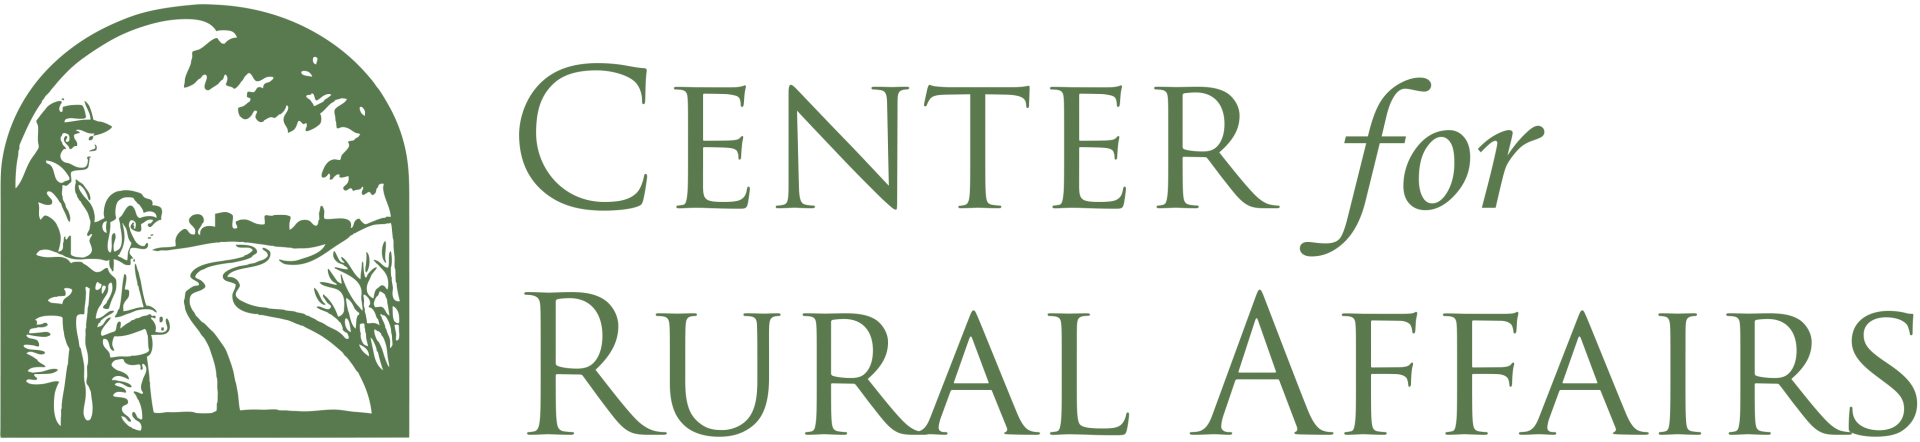 Center for Rural Affairs